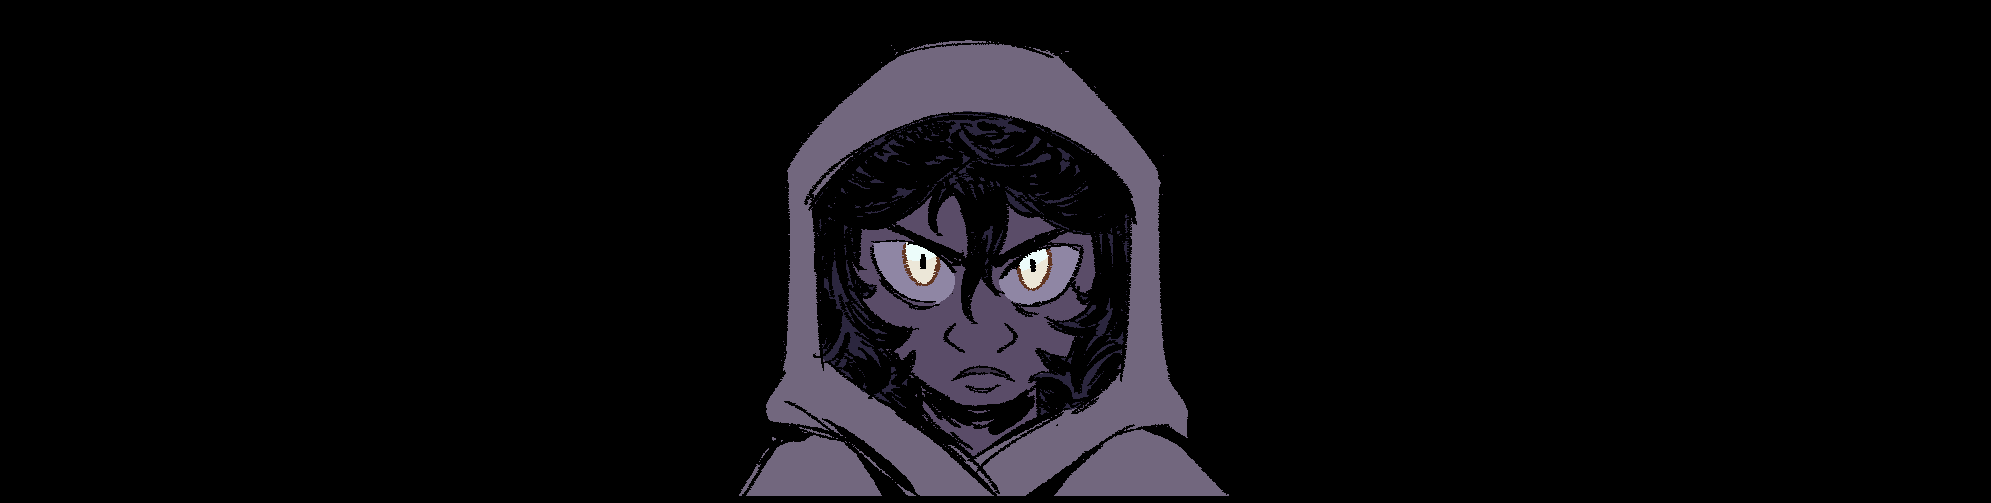 A drawing of Nyx from the shoulders up. She is looking directly at the viewer and is against a pitch black background.